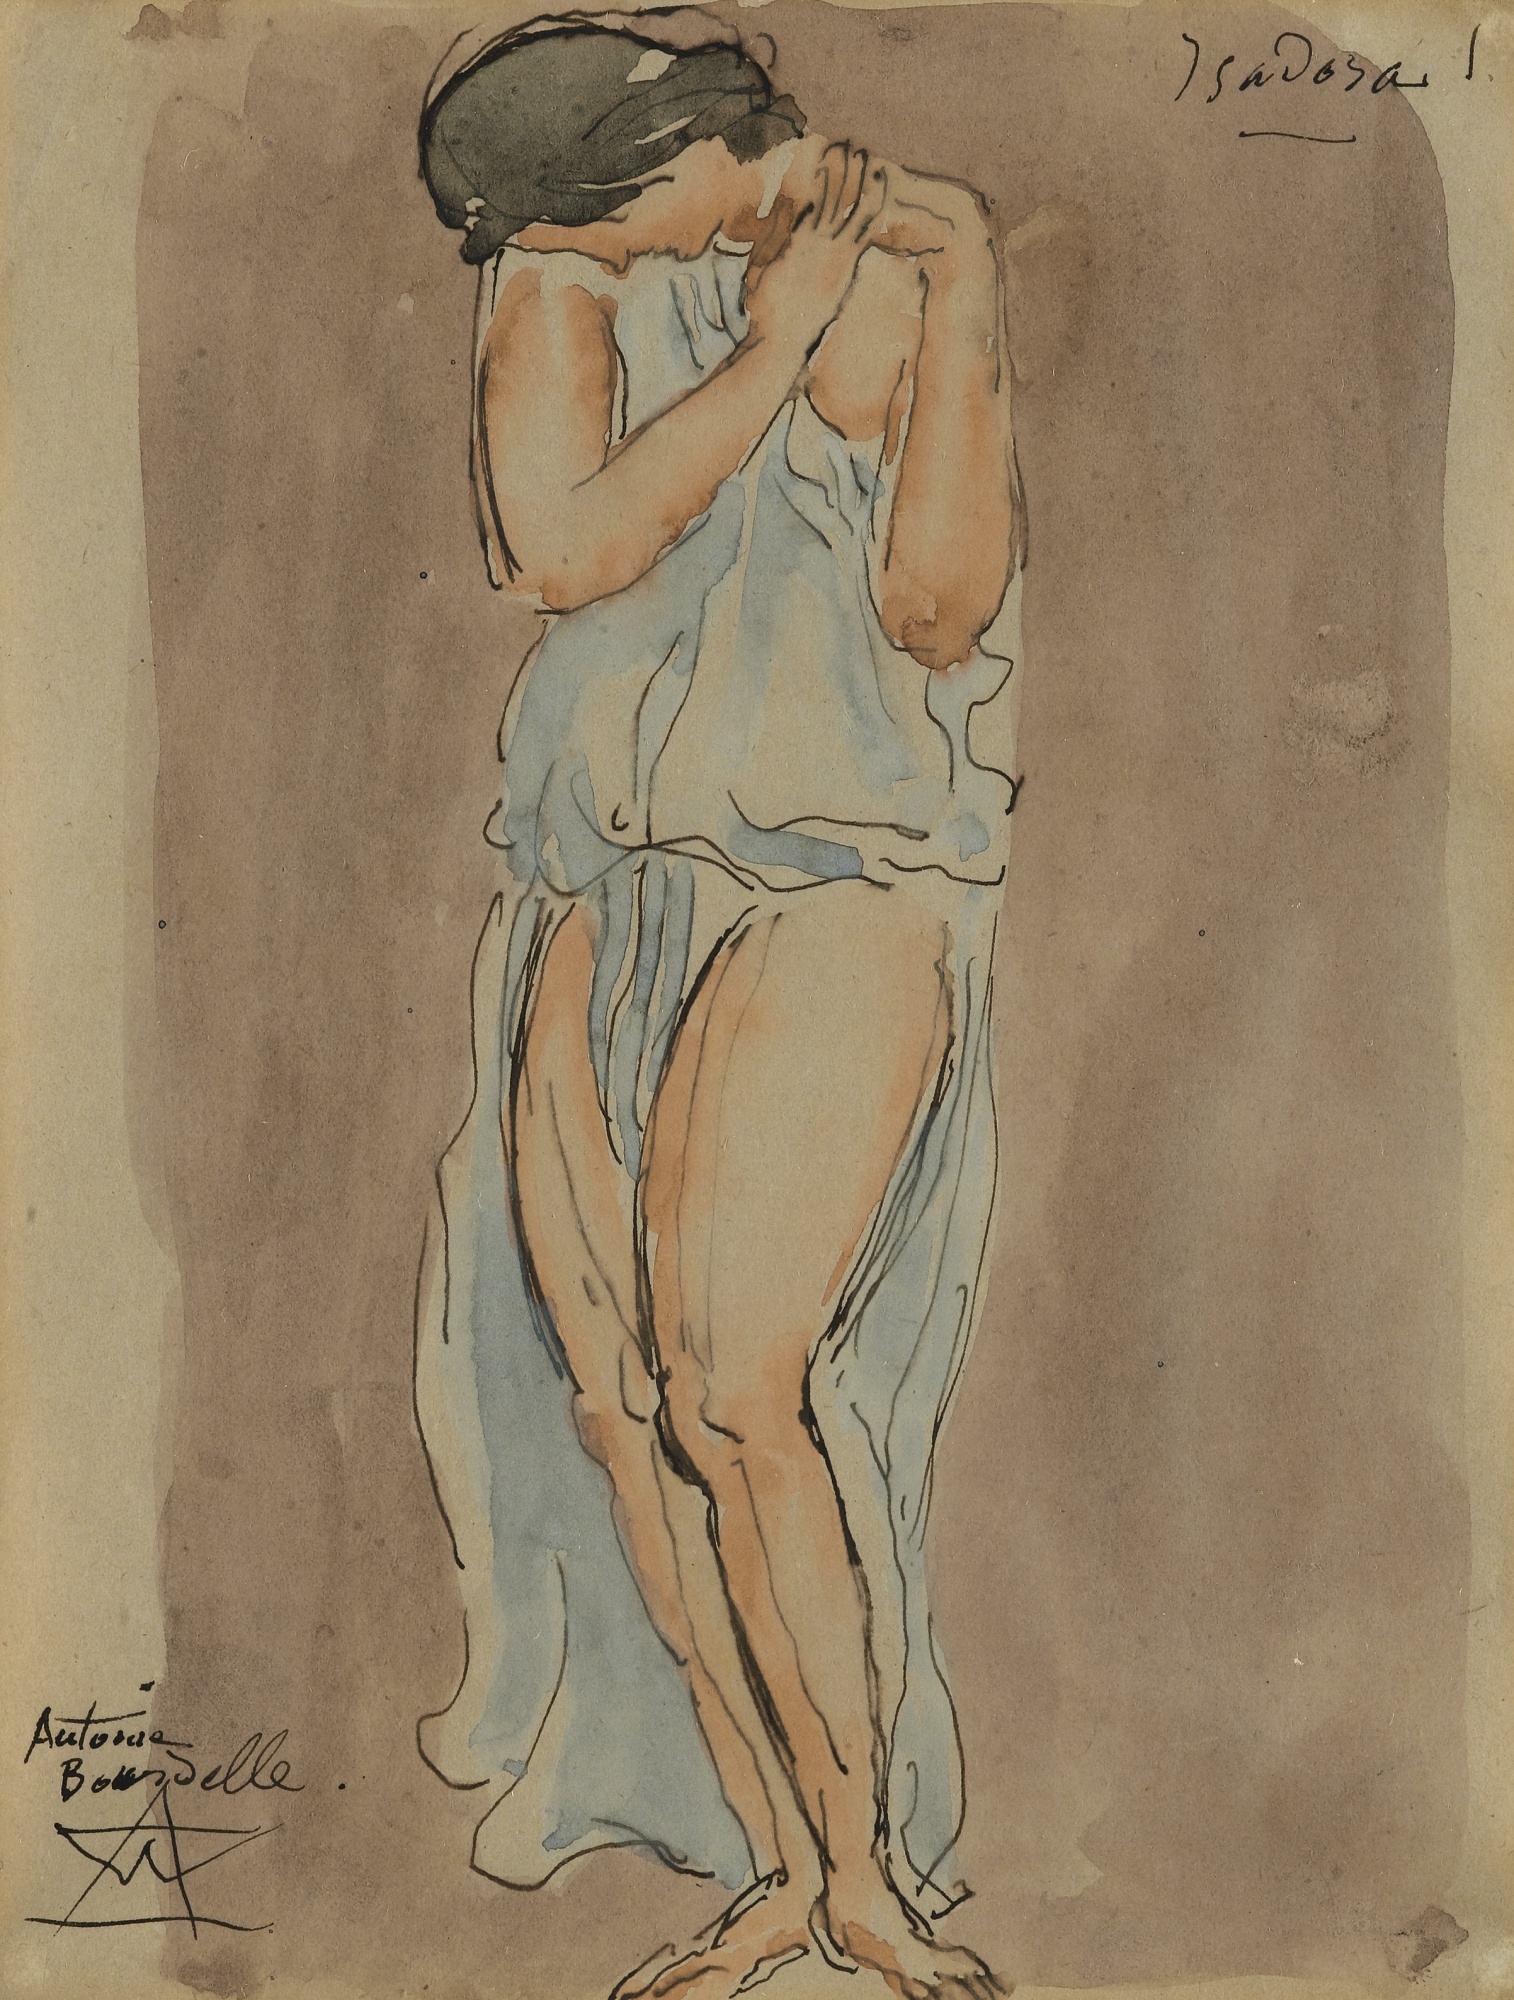 Artwork by Émile-Antoine Bourdelle, ISADORA DUNCAN, Made of pencil, ink and watercolour on paper